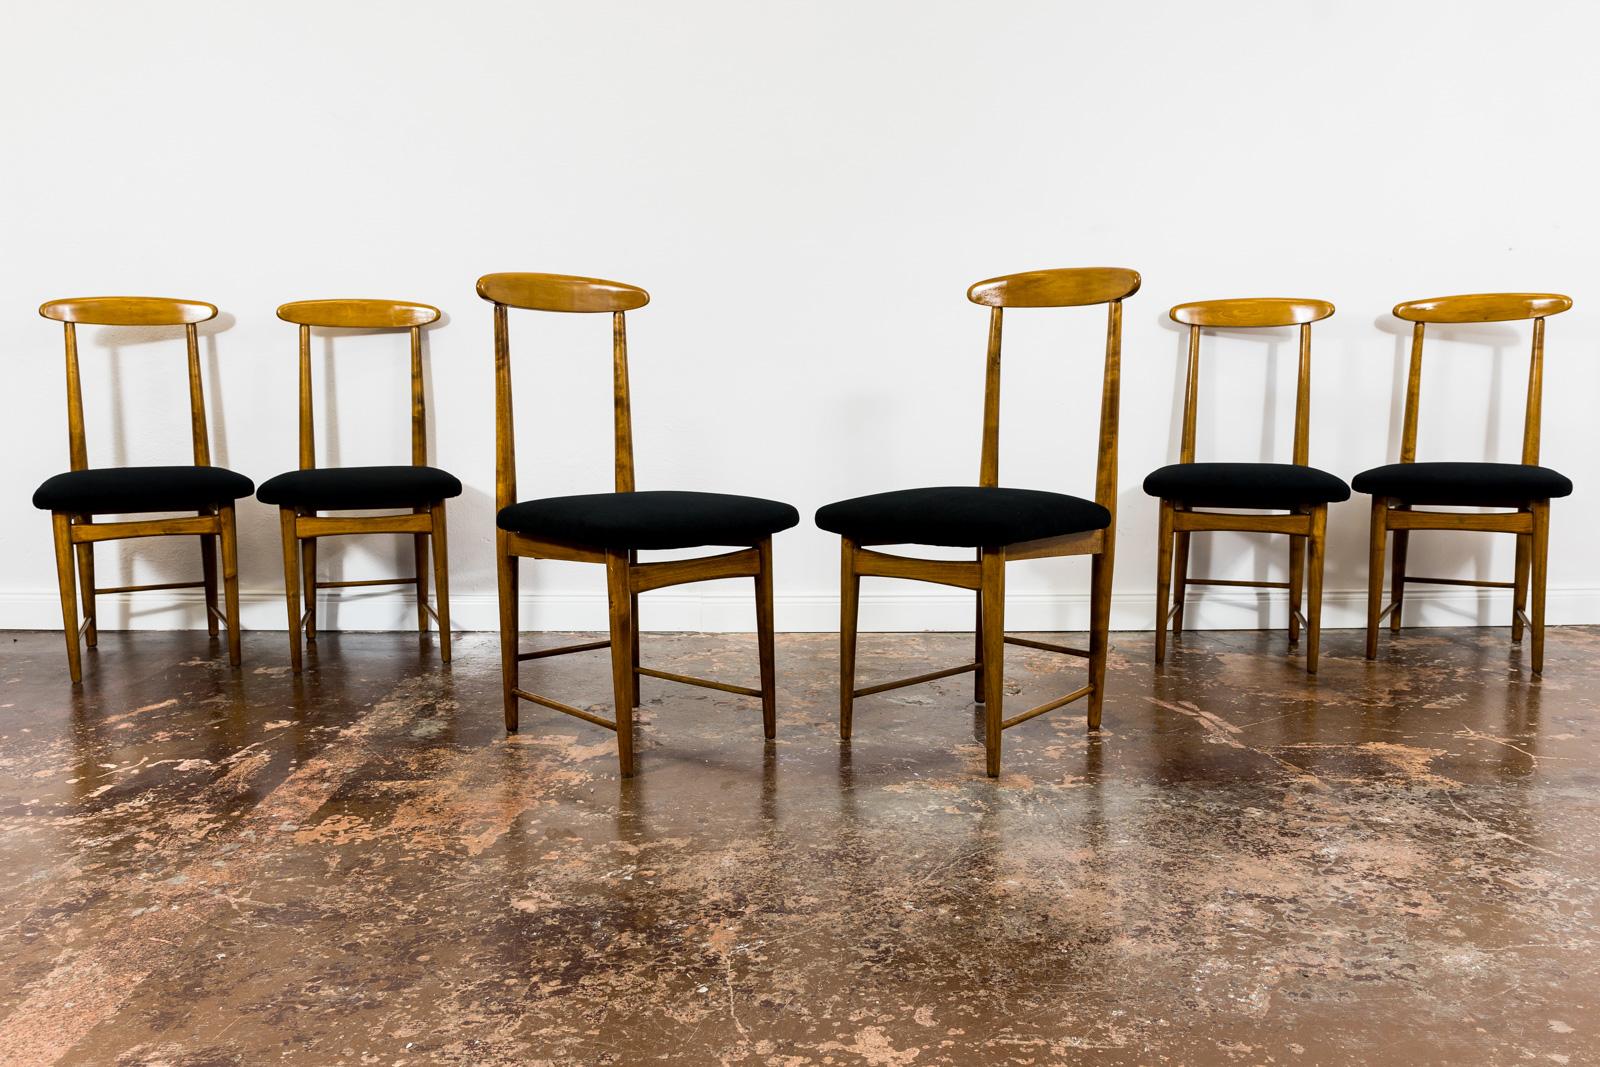 Polish Set Of 6 Dining Chairs By Bernard Malendowicz 1960's For Sale